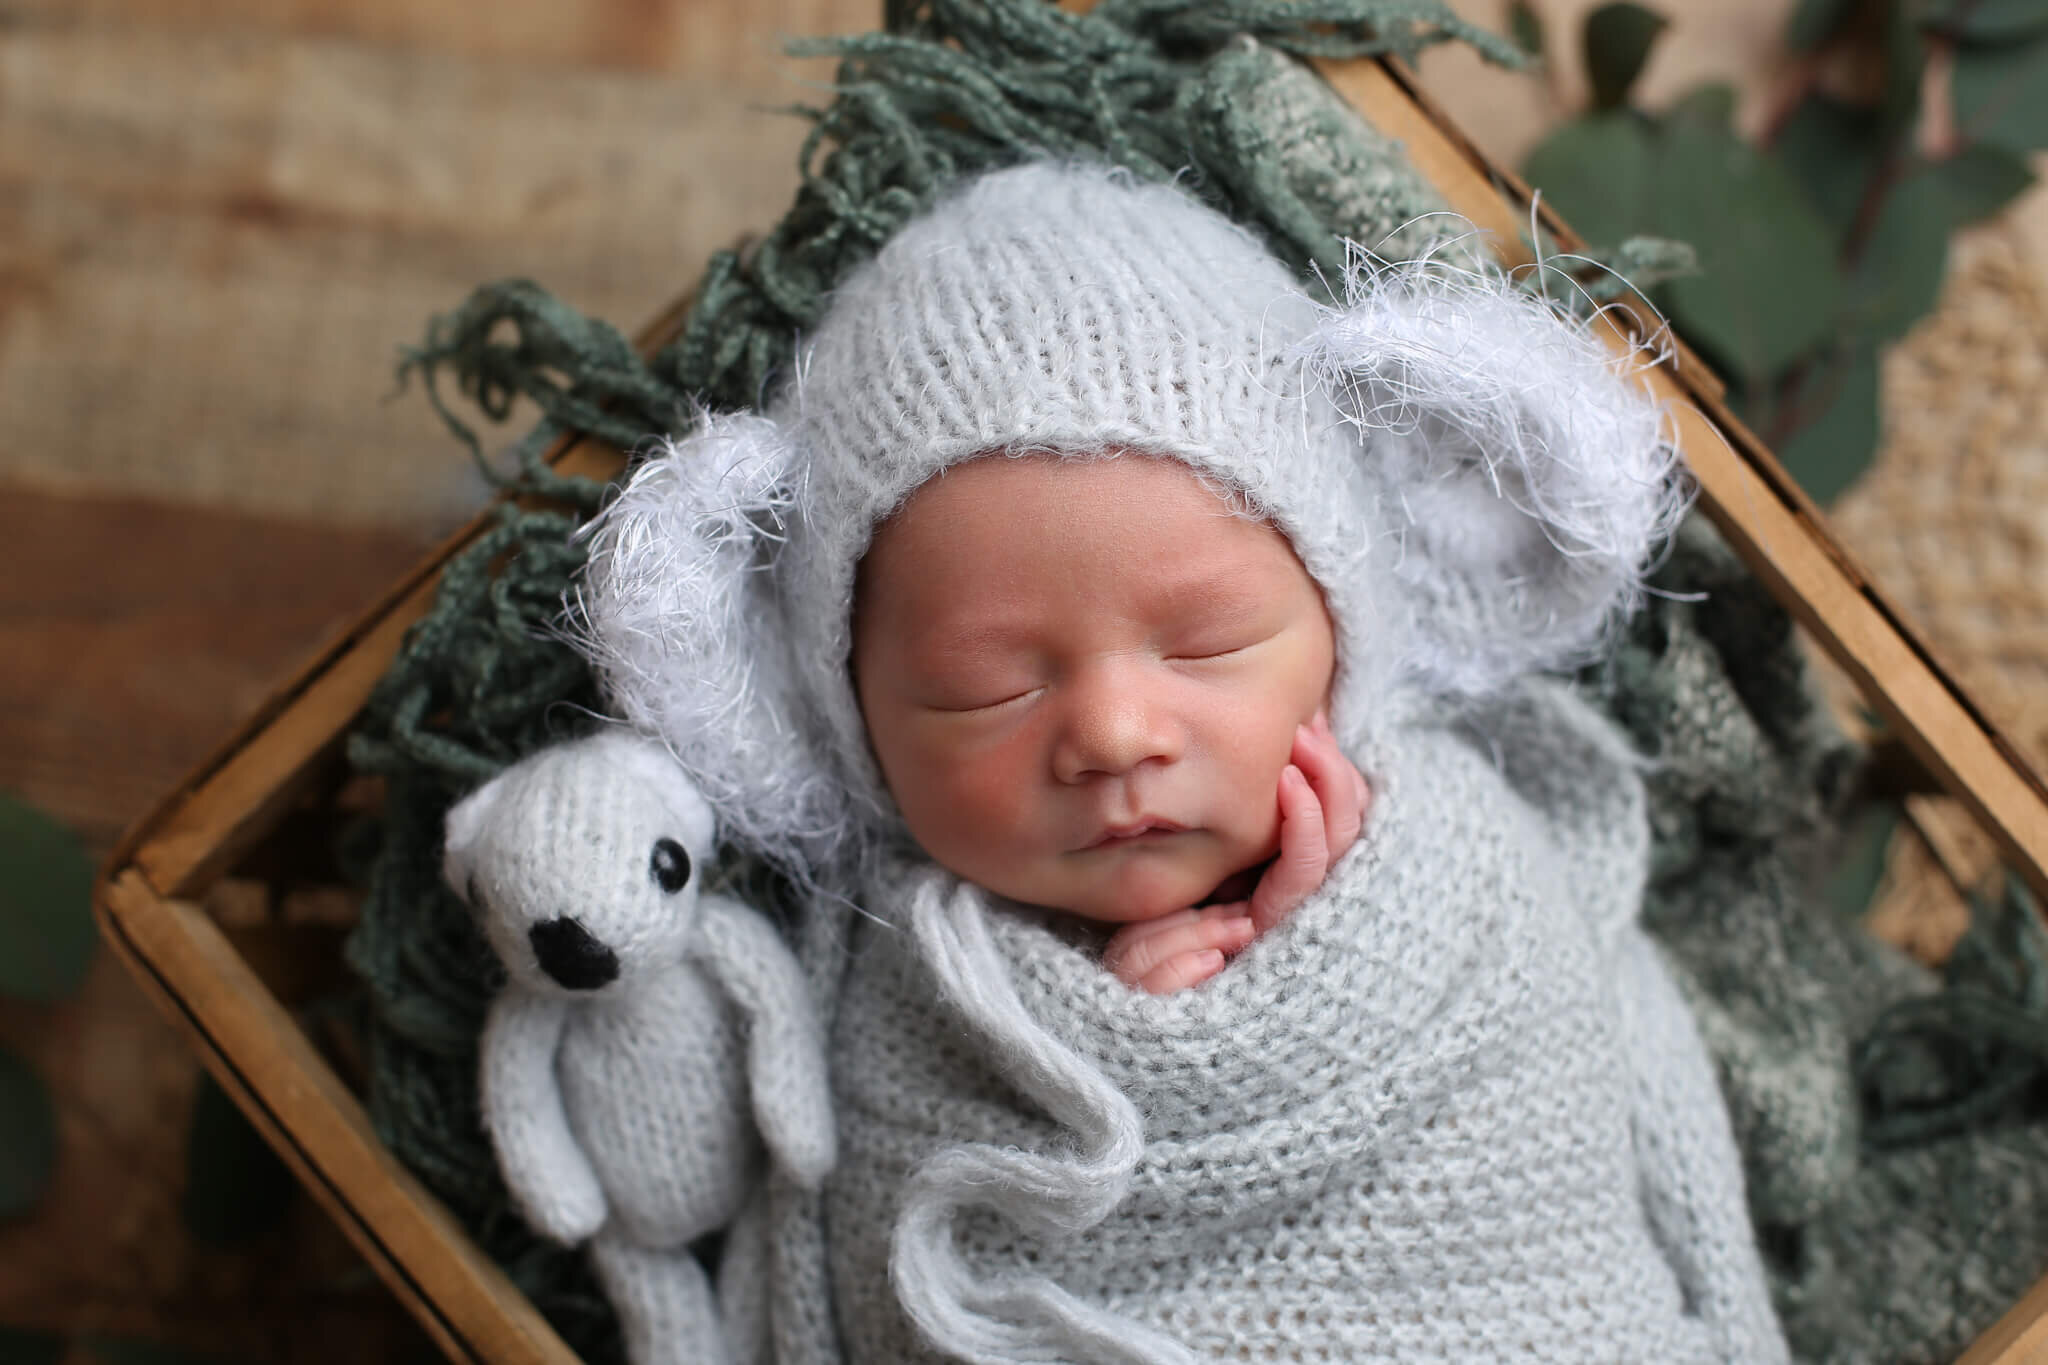  A photograph of a newborn in a knitted cap with big fuzzy ears and wrapped in a blanket with its tiny hands peeking out, sleeping soundly with a stuffed animal, nestled in a wooden basket by Photography by L Rose - San Diego newborn photography 